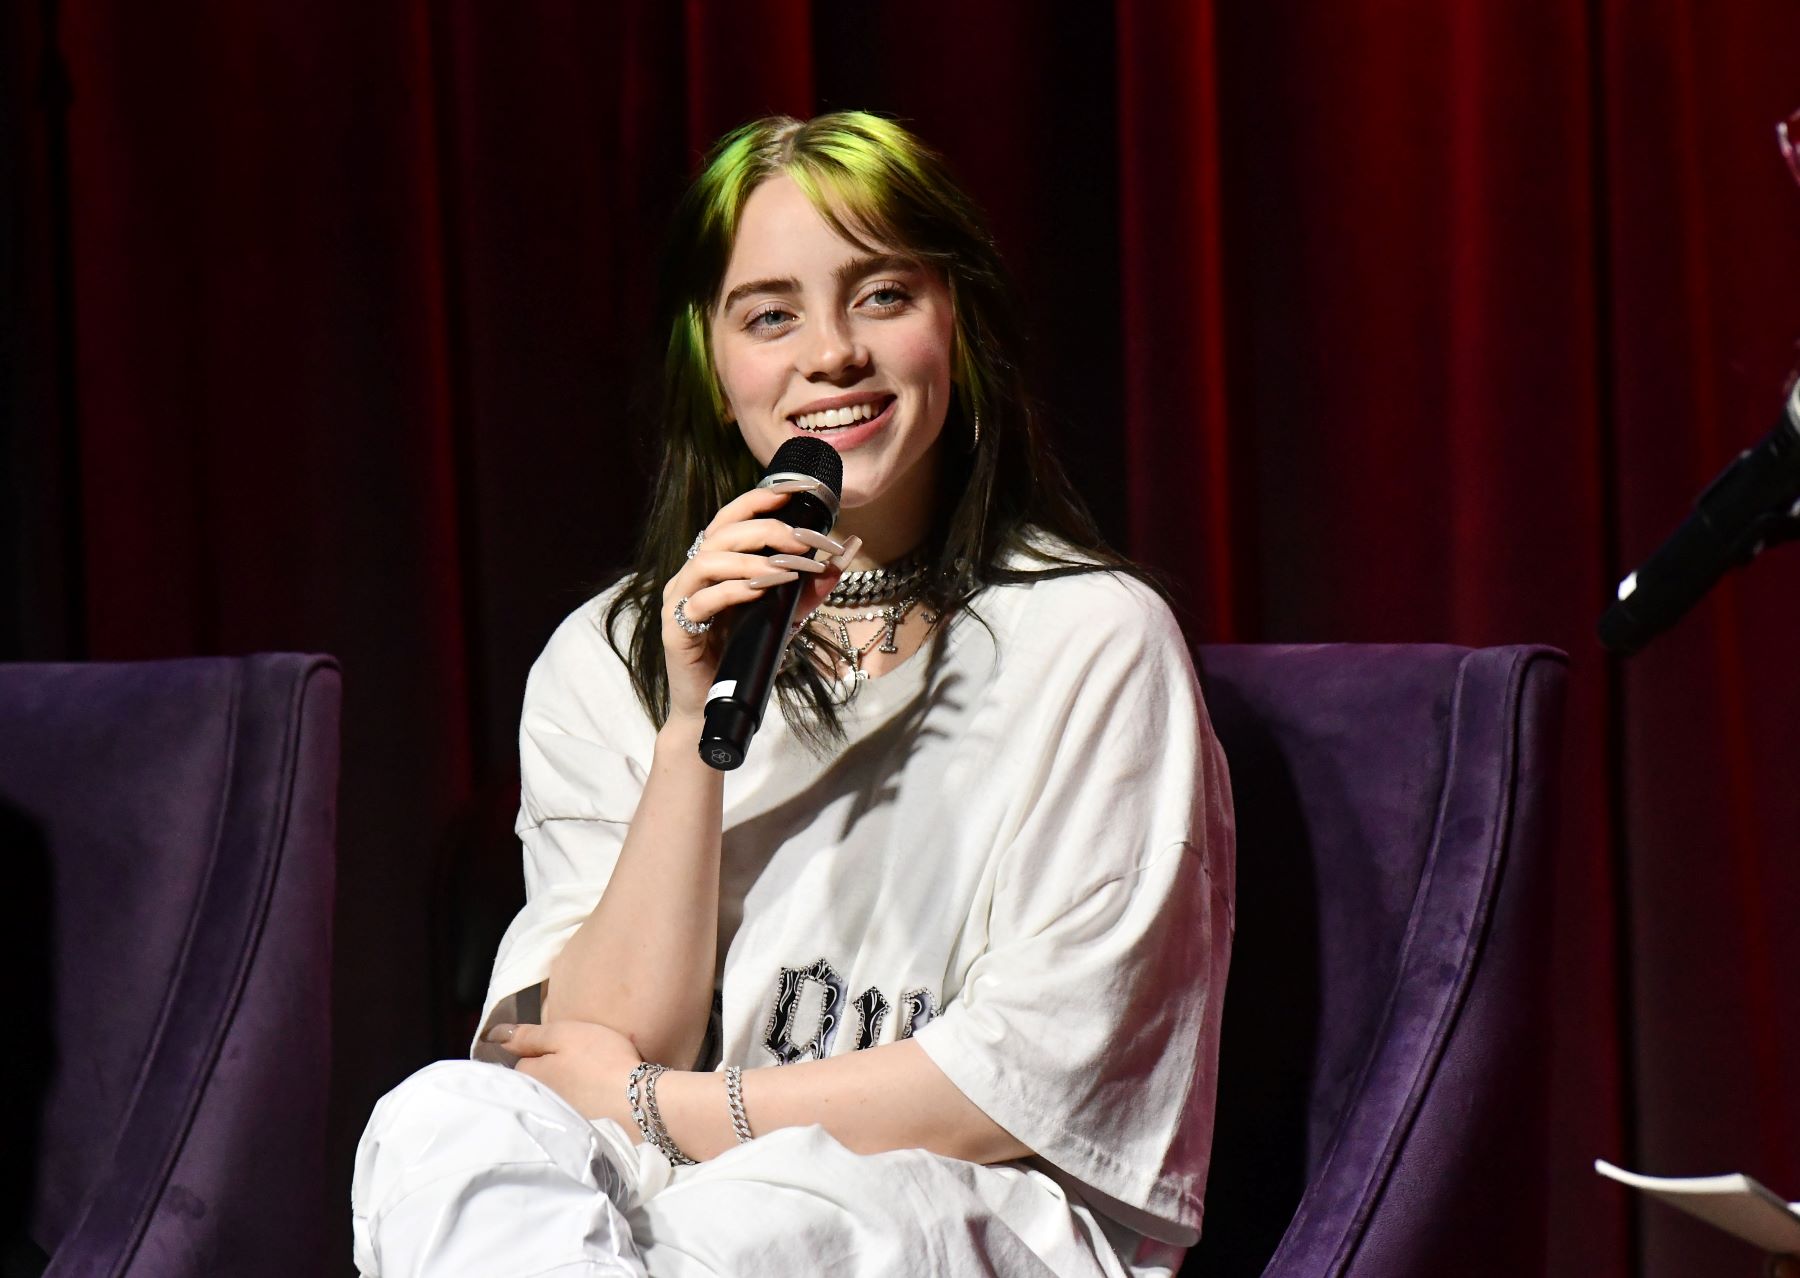 Billie Eilish performing at The Grammy Museum in Los Angeles, California